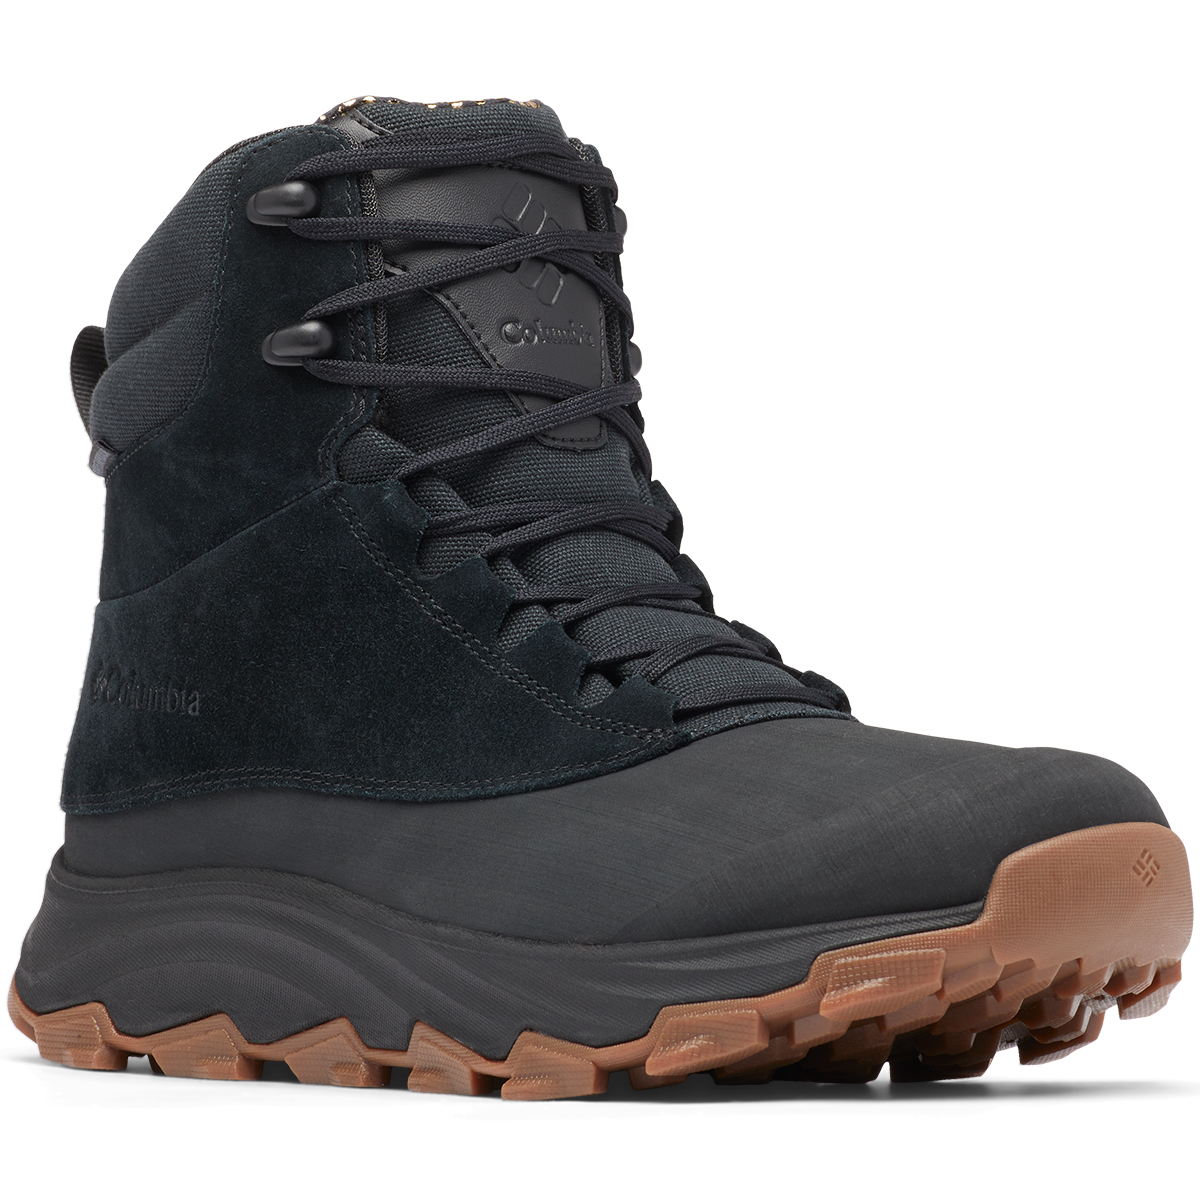 Columbia Men's Expeditionist Shield Boots